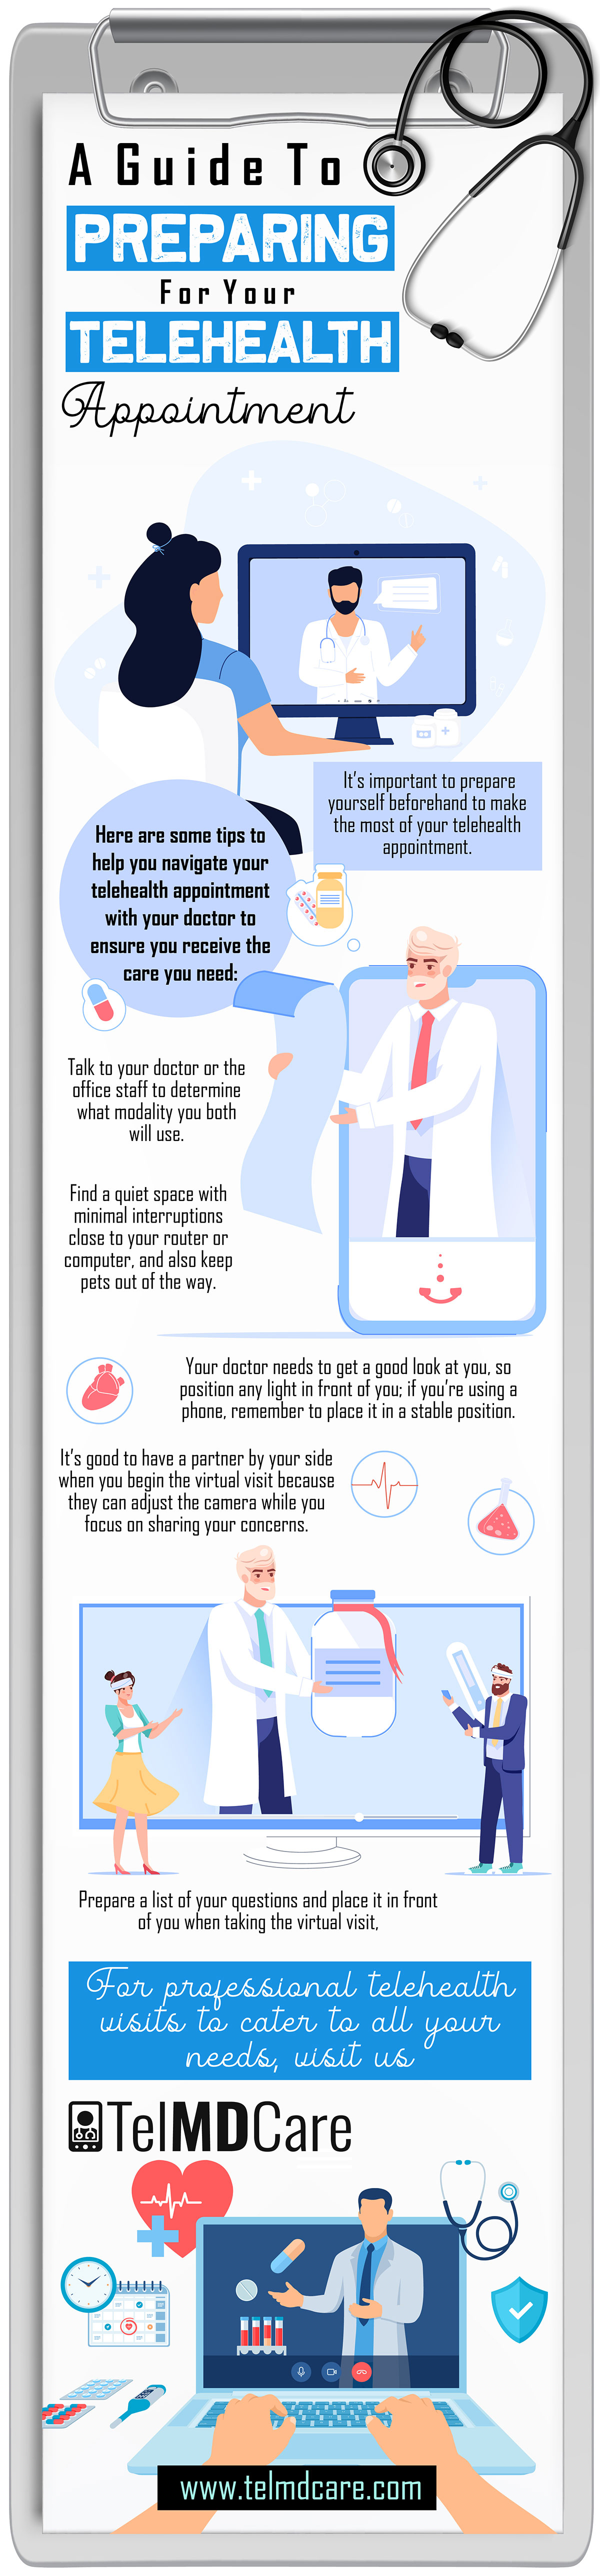 A Guide to Preparing for your Telehealth Appointment